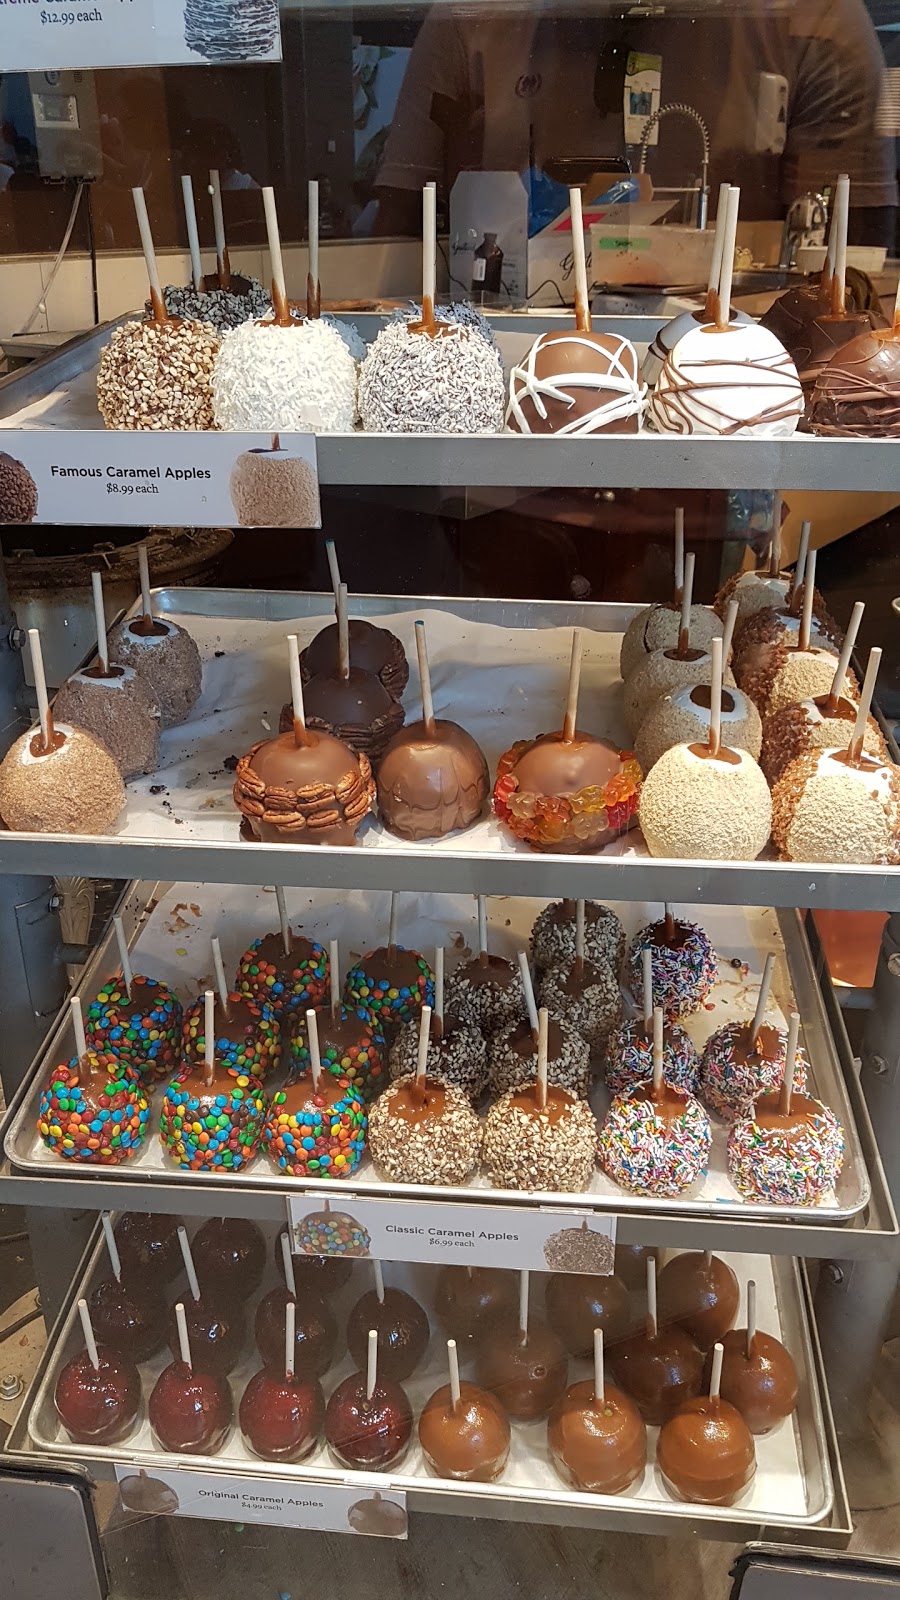 Rocky Mountain Chocolate Factory | The Outlet Collection, 300 Taylor Rd Unit 807, Niagara-on-the-Lake, ON L0S 1J0, Canada | Phone: (905) 685-5500